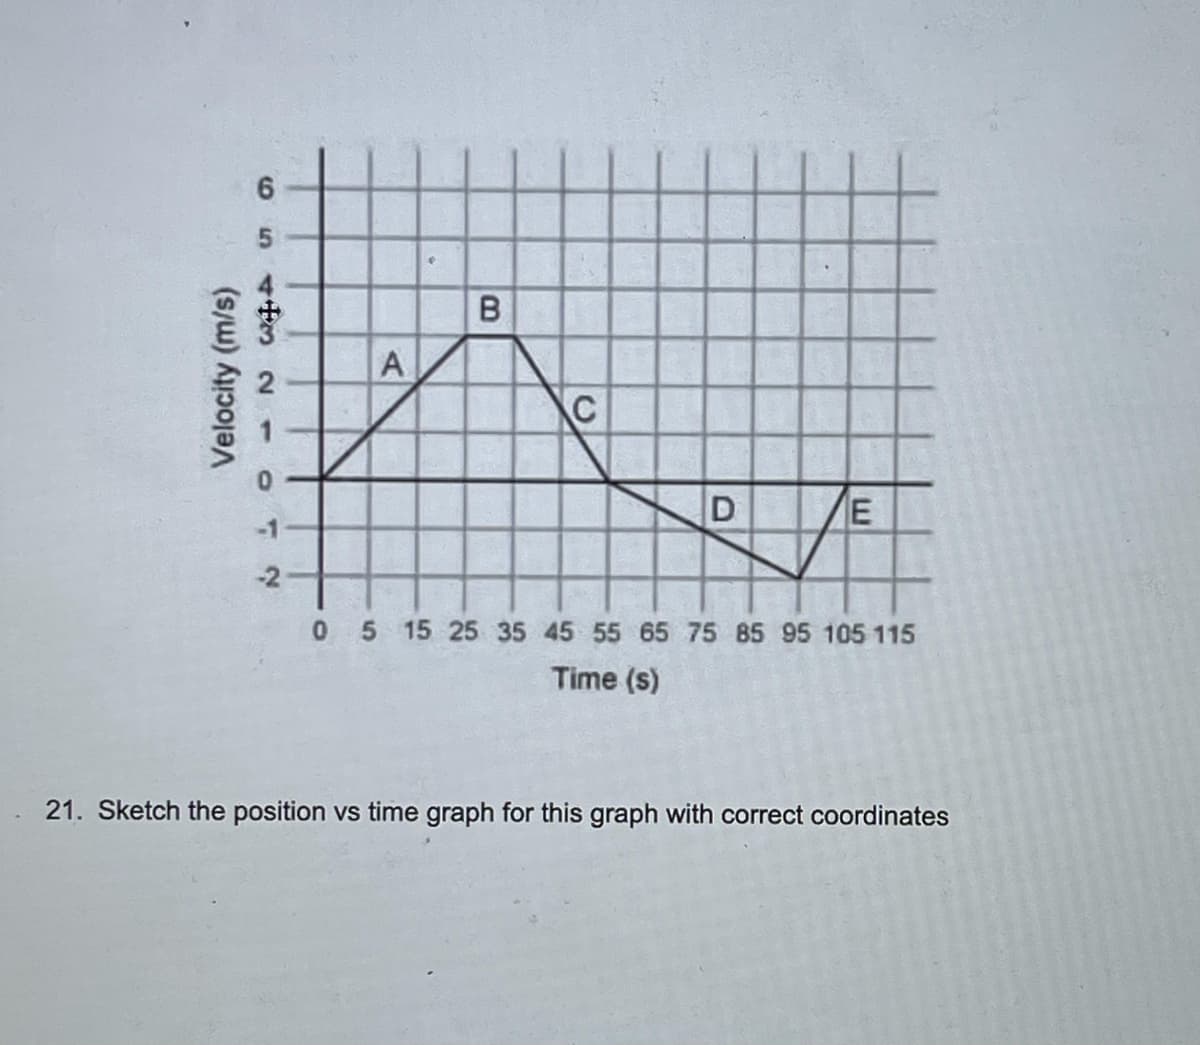 6.
B
A
C
D
E
-1
-2
05 15 25 35 45 55 65 75 85 95 105 115
Time (s)
21. Sketch the position vs time graph for this graph with correct coordinates
Velocity (m/s)
